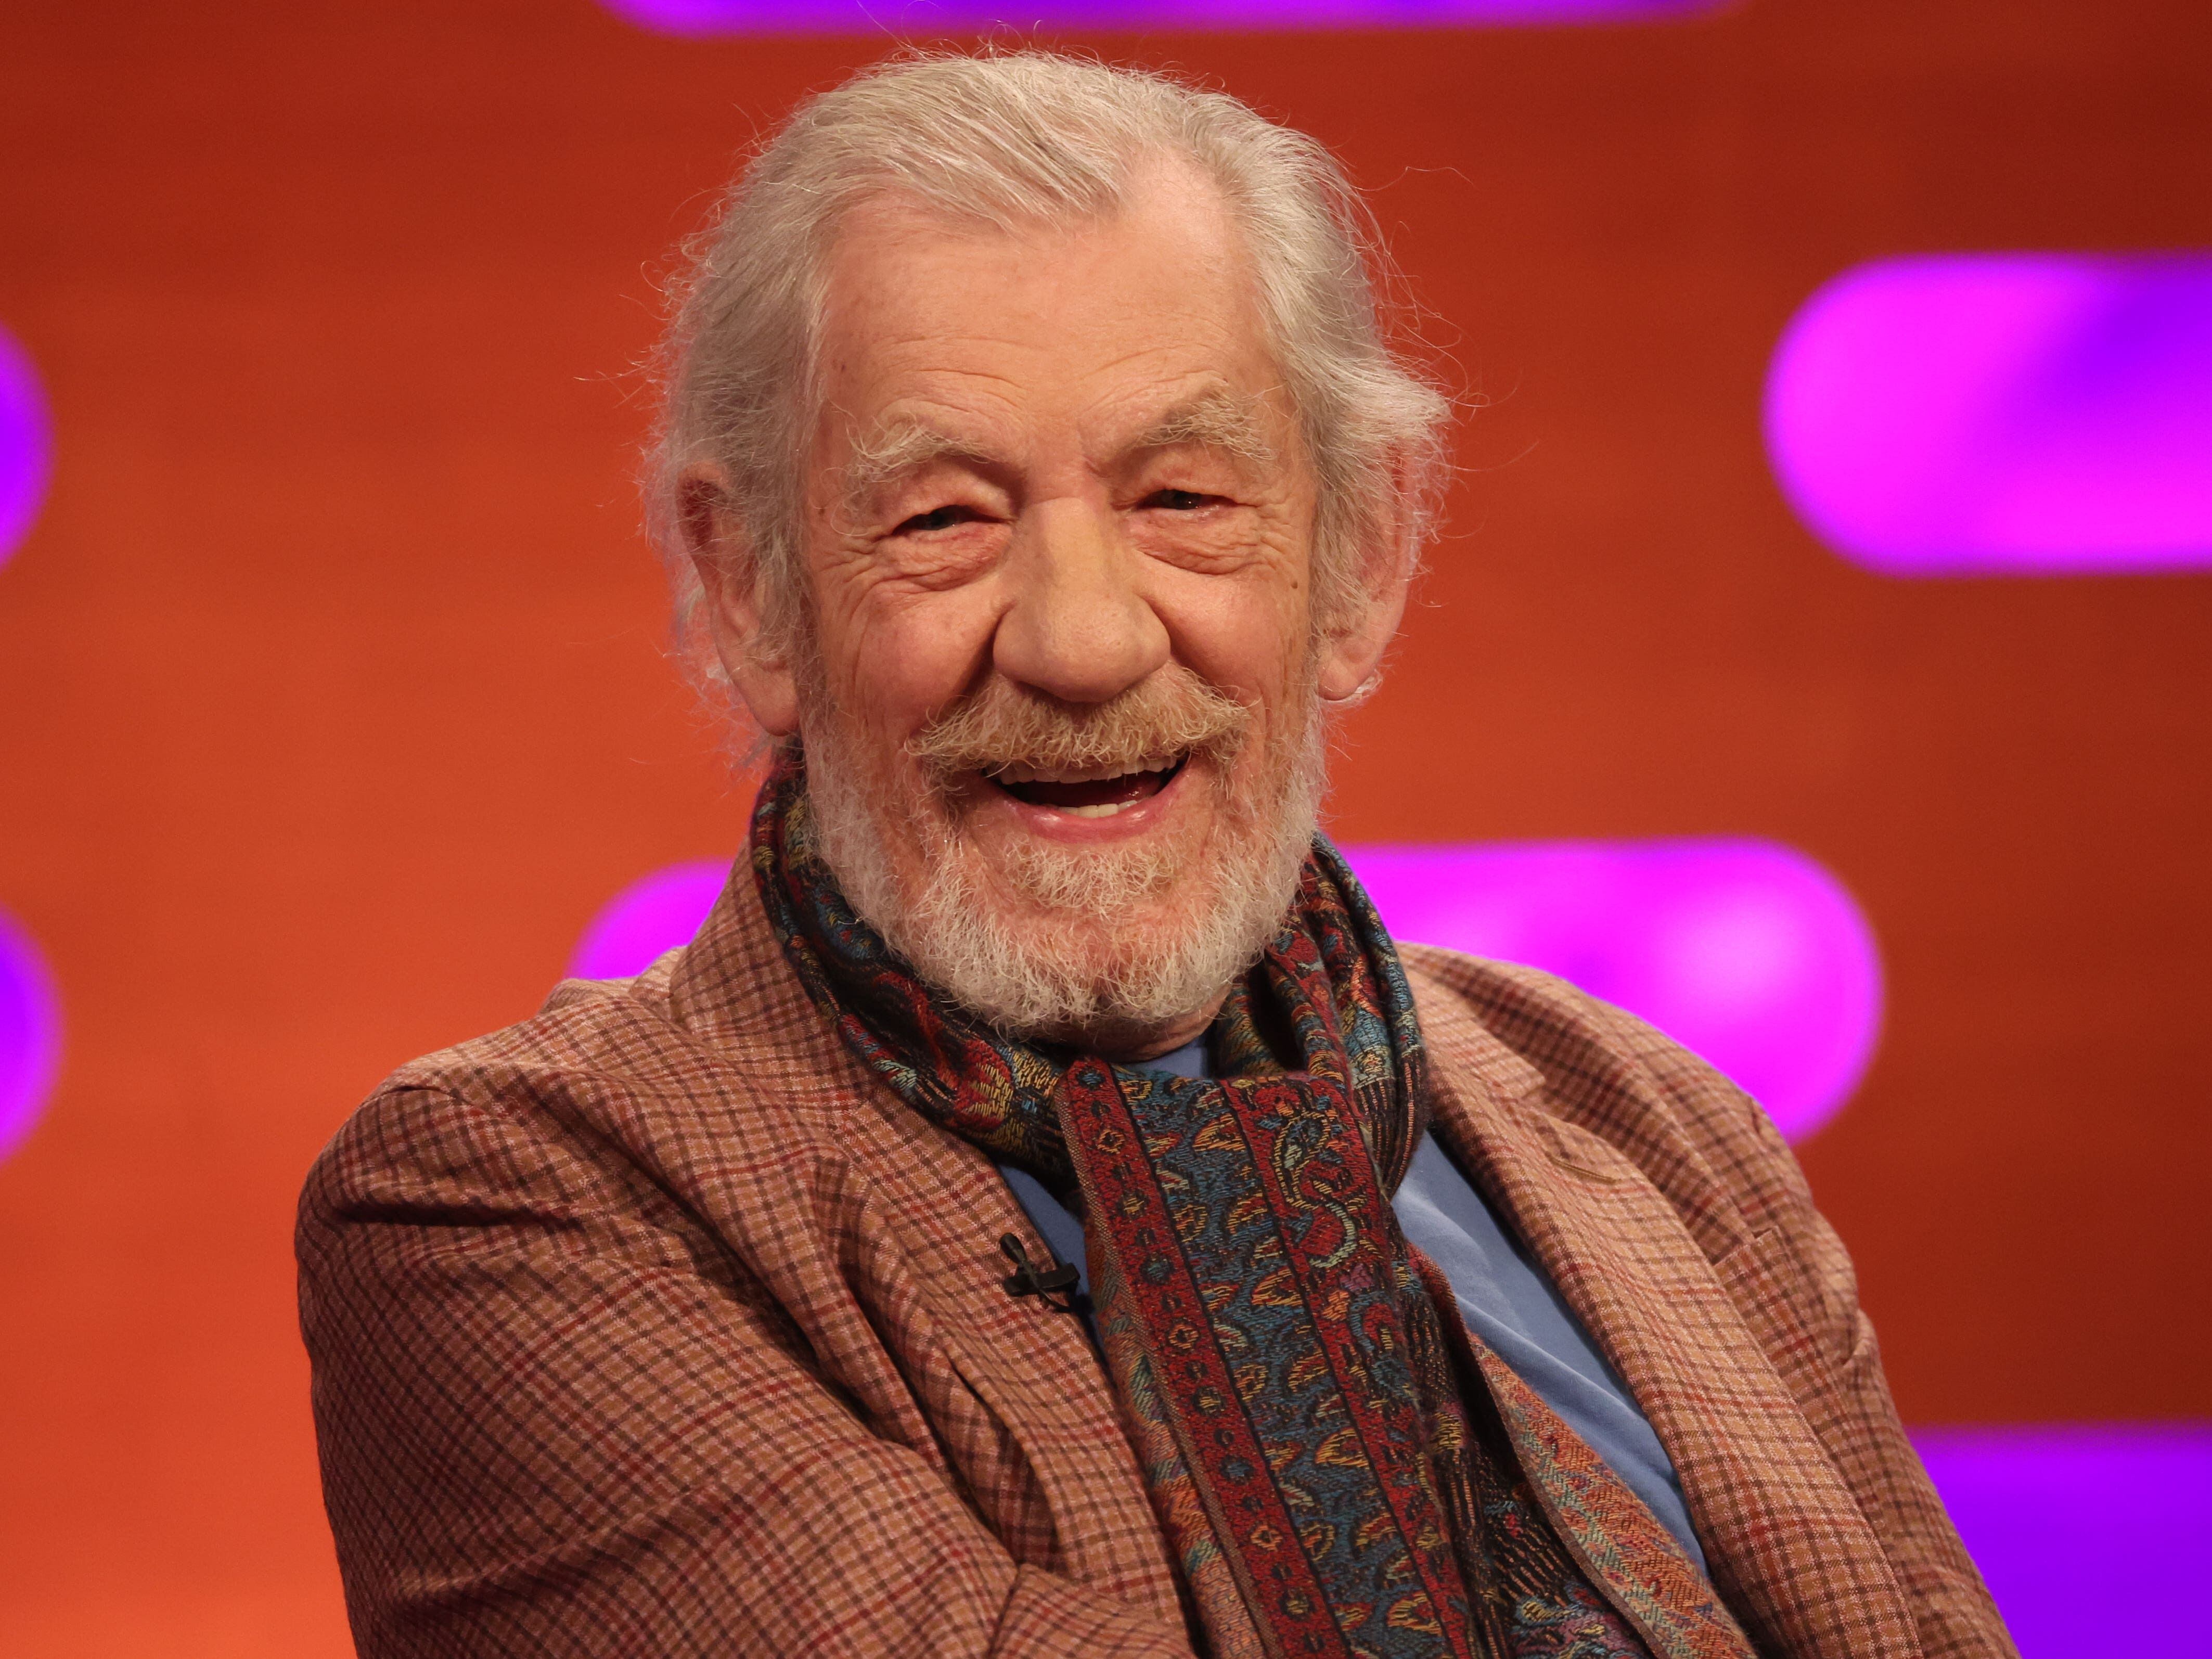 Sir Ian McKellen doing ‘very very well’ after fall says his understudy